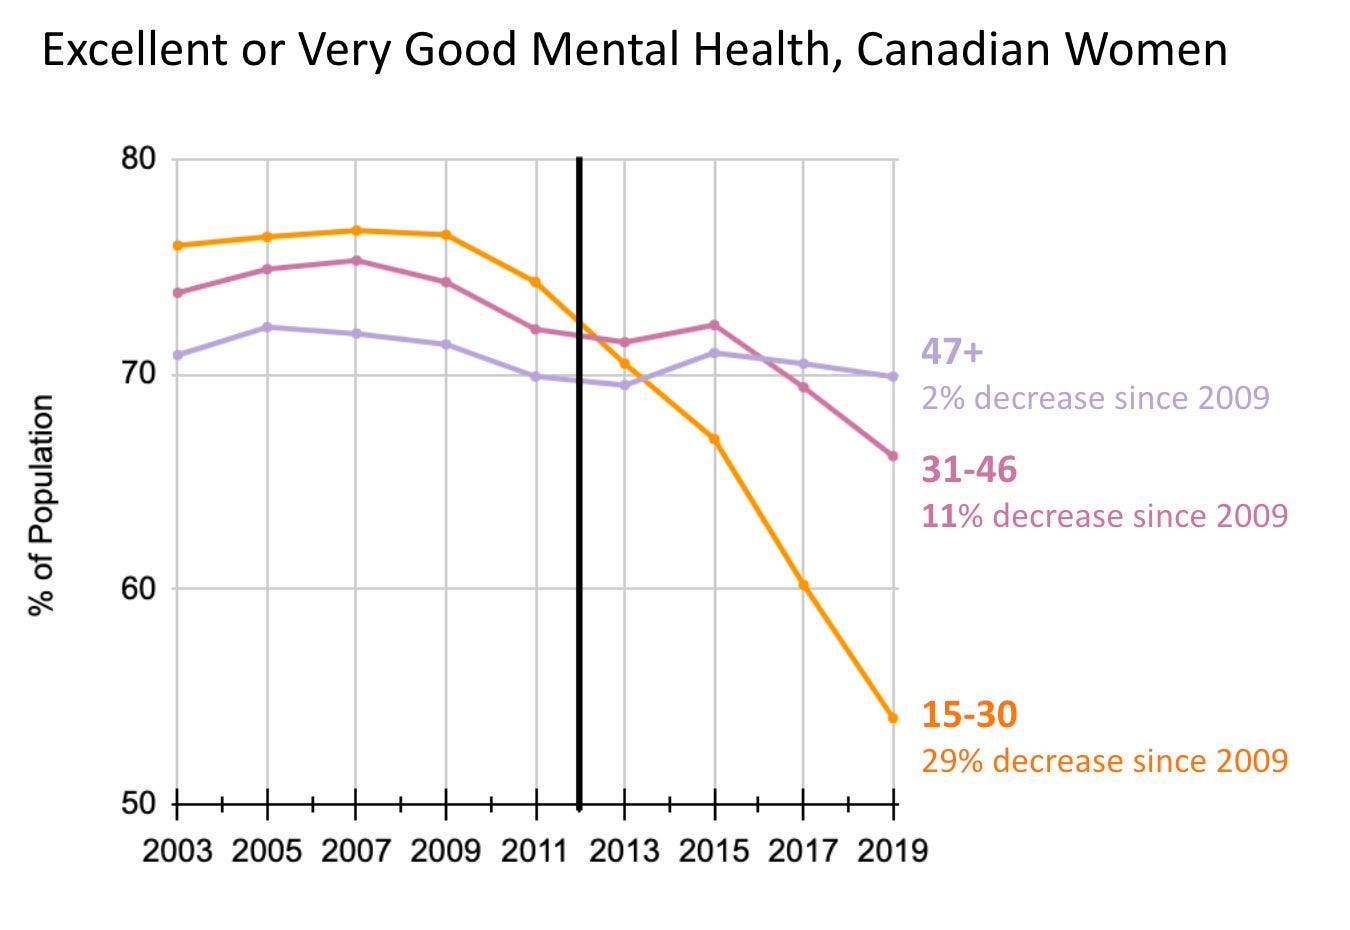 trends in very good mental health in canada. Steepest declines in 15-30 year old women since 2010